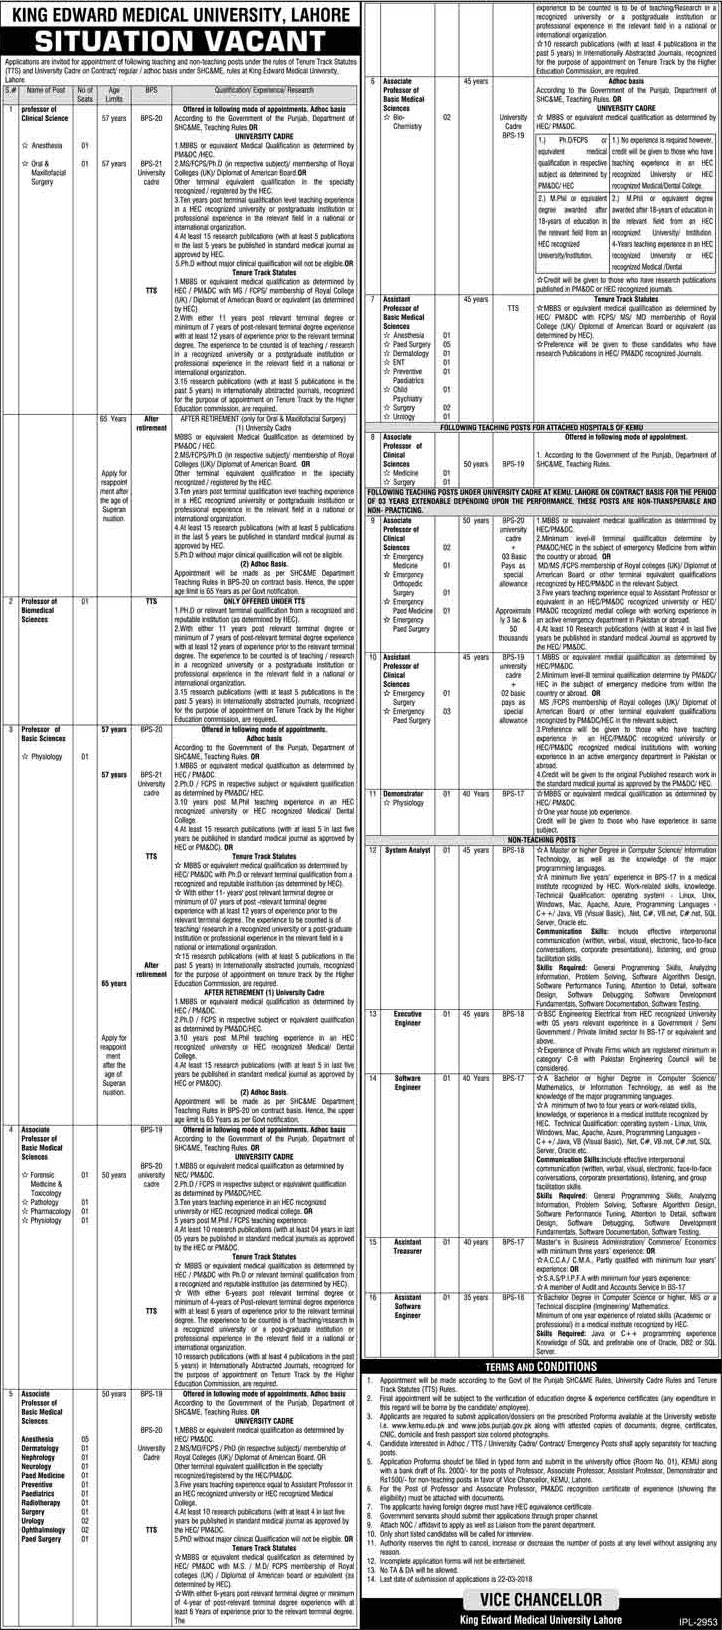 Jobs in King Edward Medical University Lahore 08 March 2018